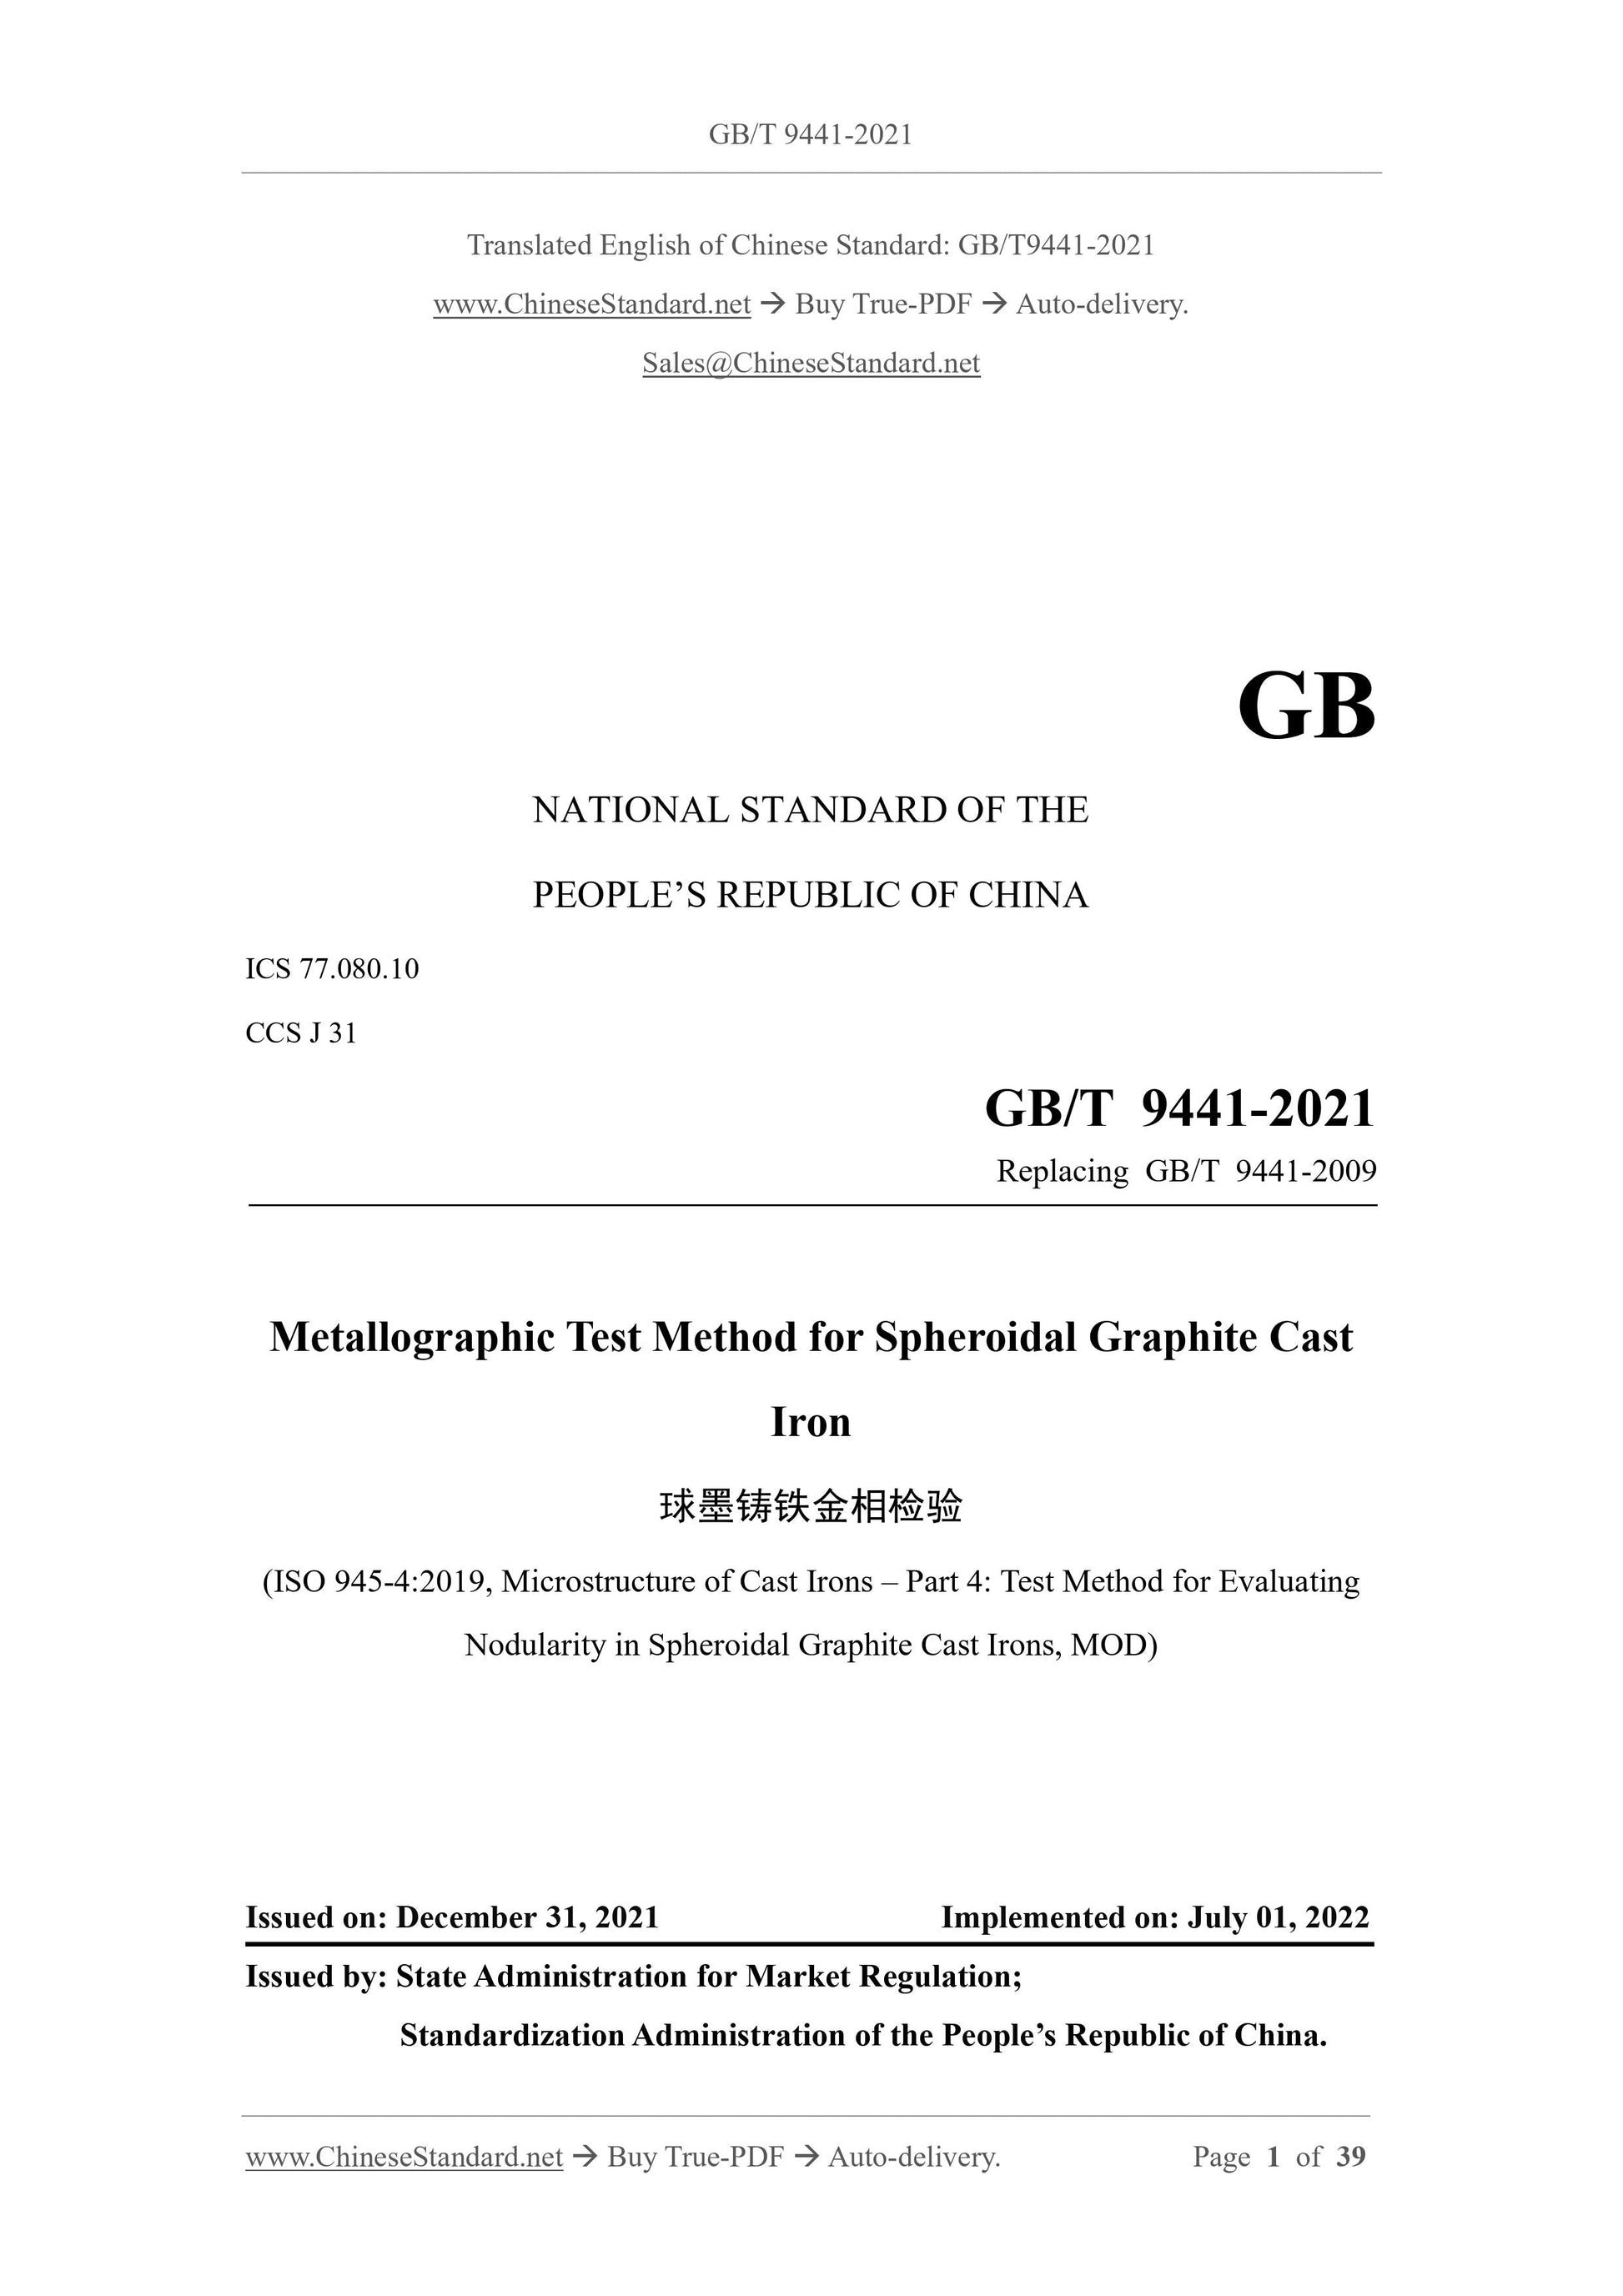 GB/T 9441-2021 Page 1